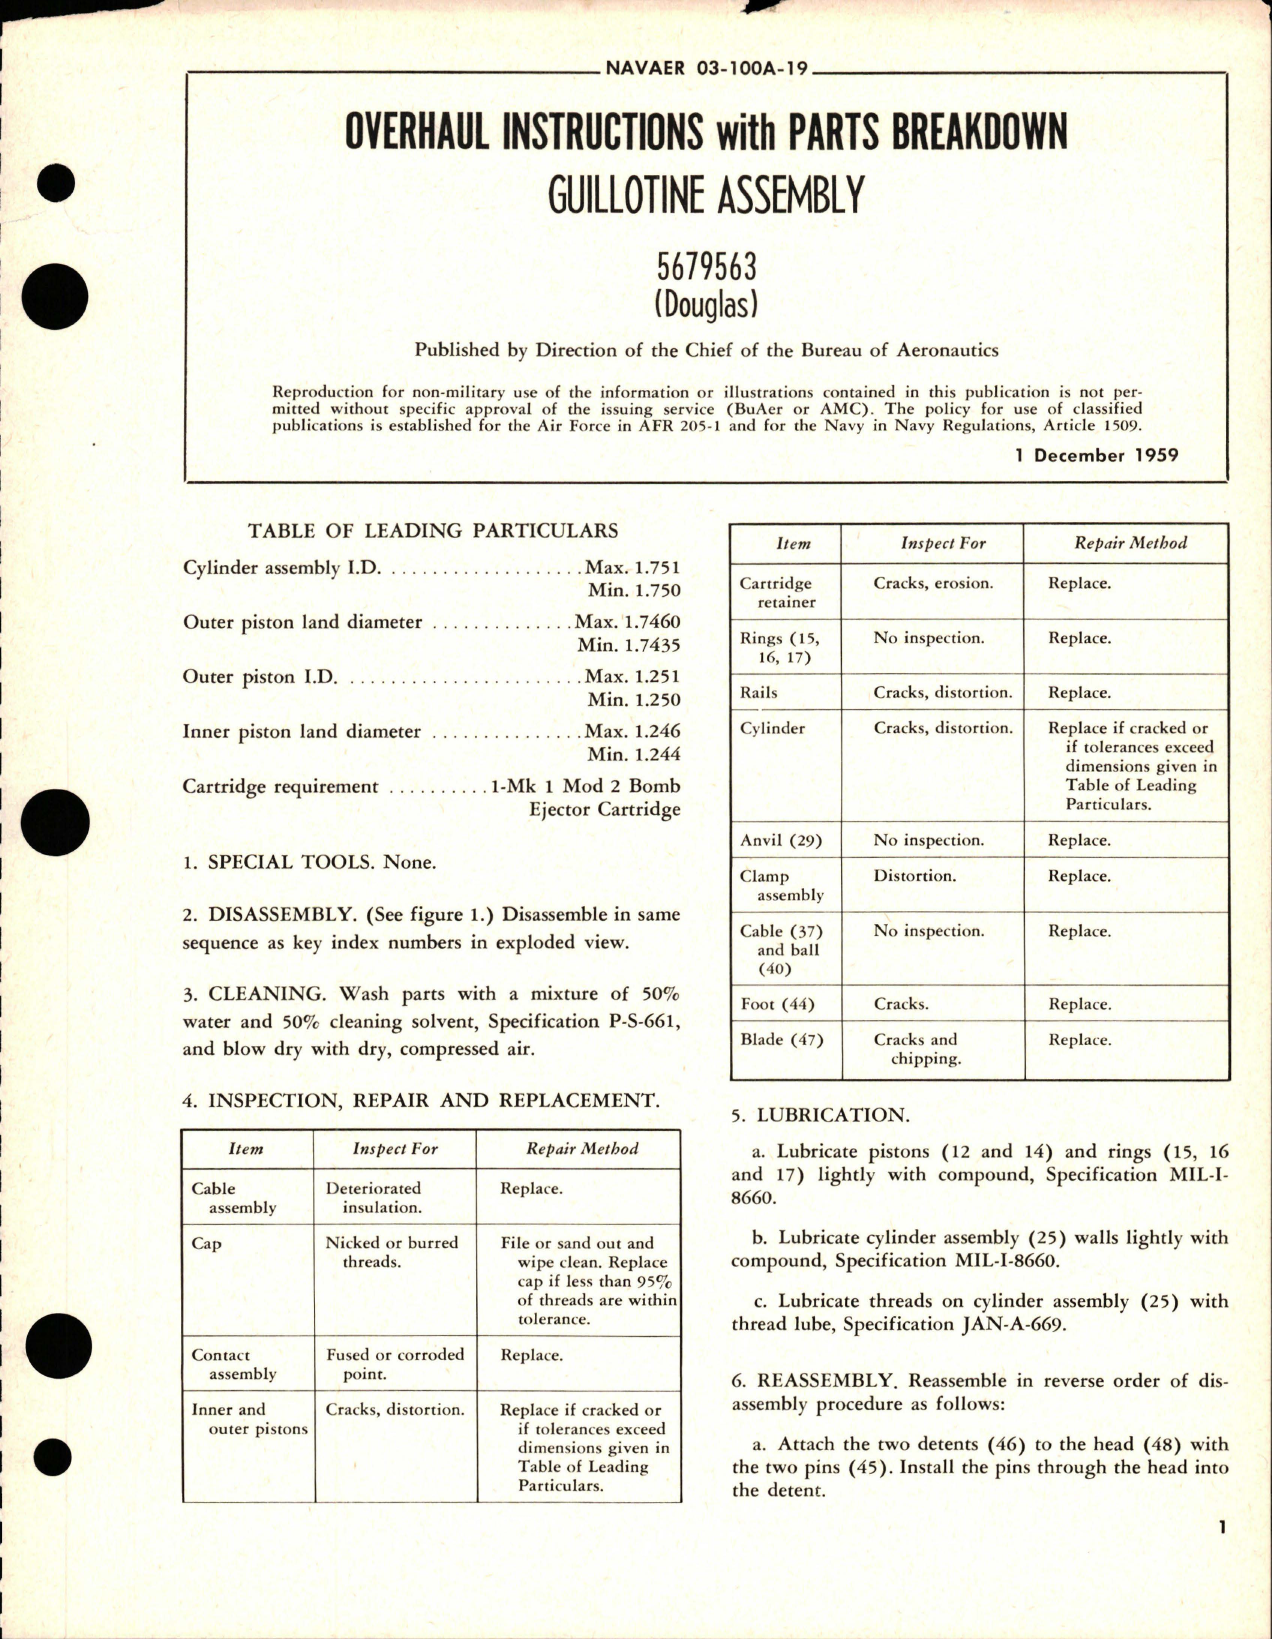 Sample page 1 from AirCorps Library document: Overhaul Instructions with Parts Breakdown for Guillotine Assembly - 5679563